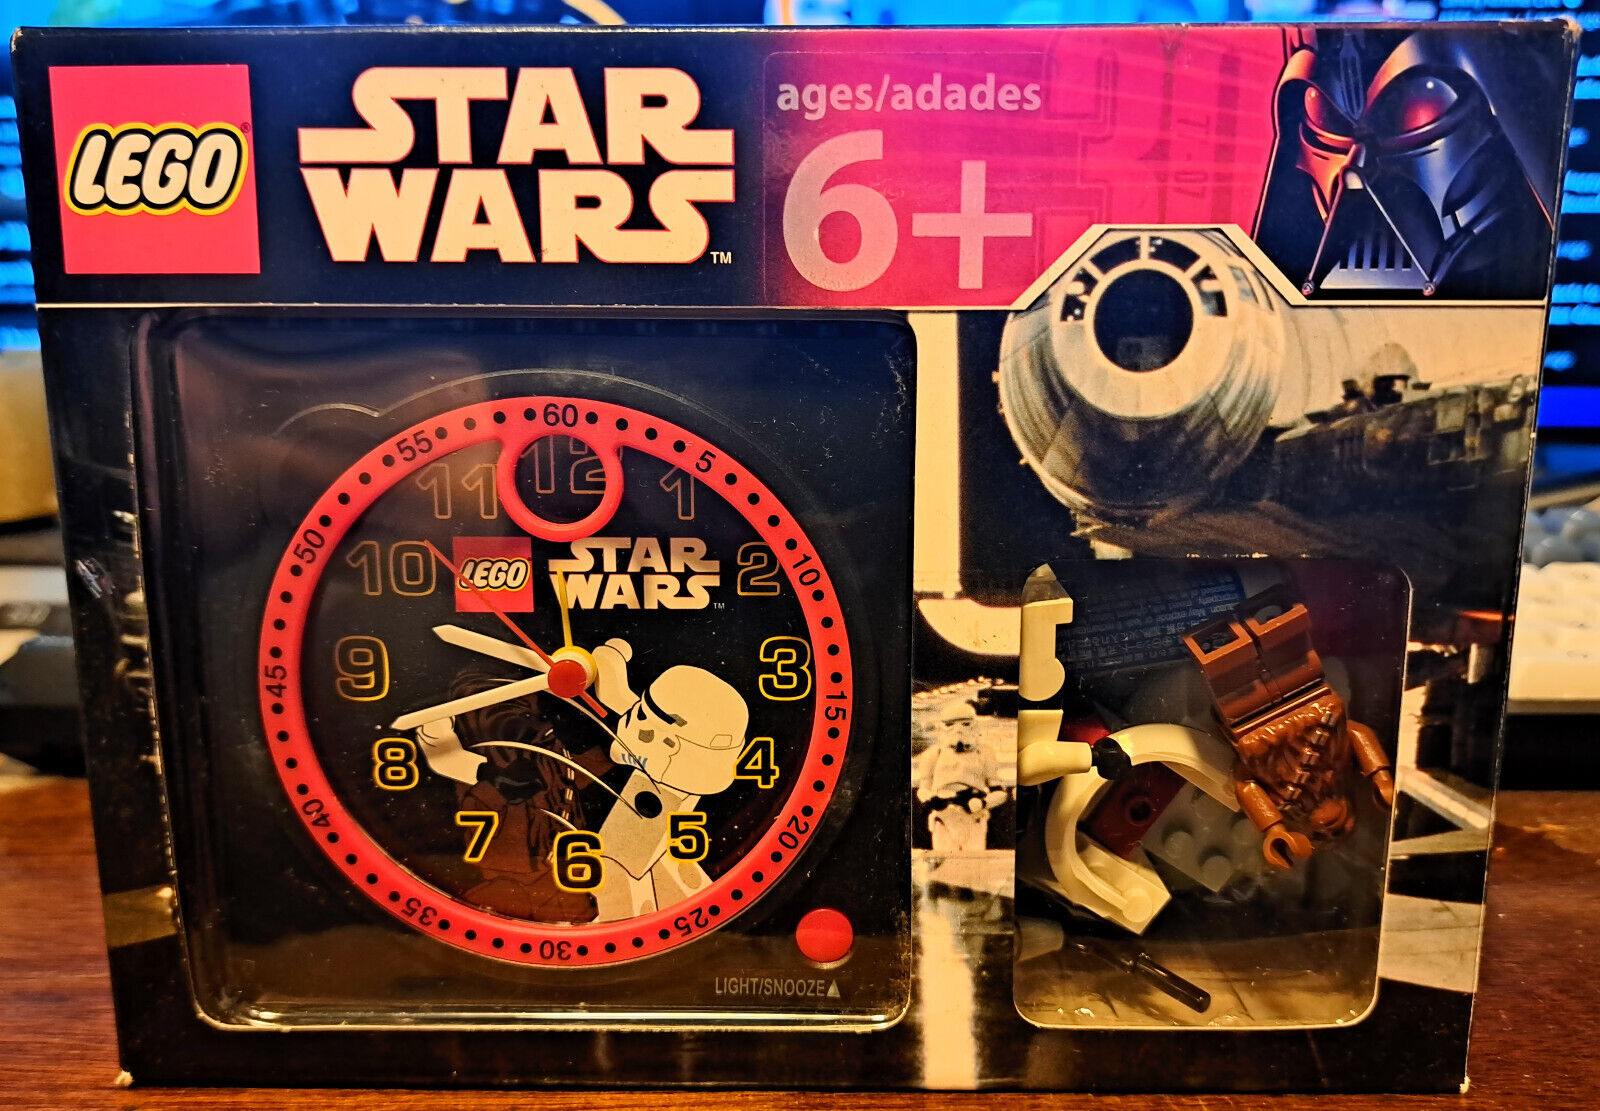 Lego Star Wars Alarm Clock with Chewbacca and Storm Trooper Complete In Box!